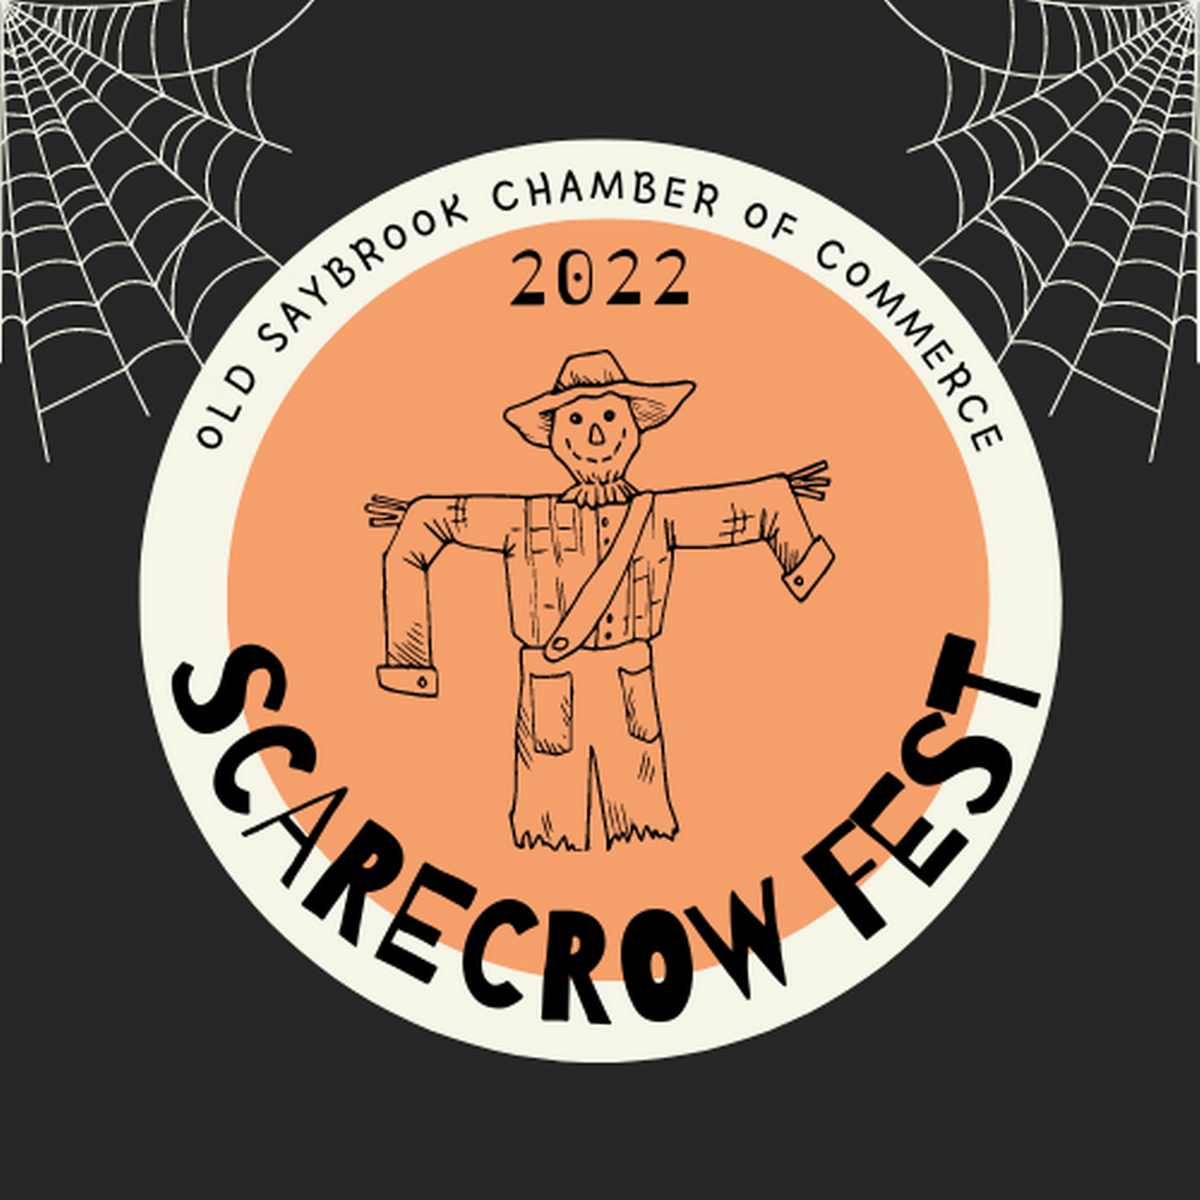 Scarecrow Fest 2022 Oct 14, 2022 to Oct 28, 2022 Old Saybrook